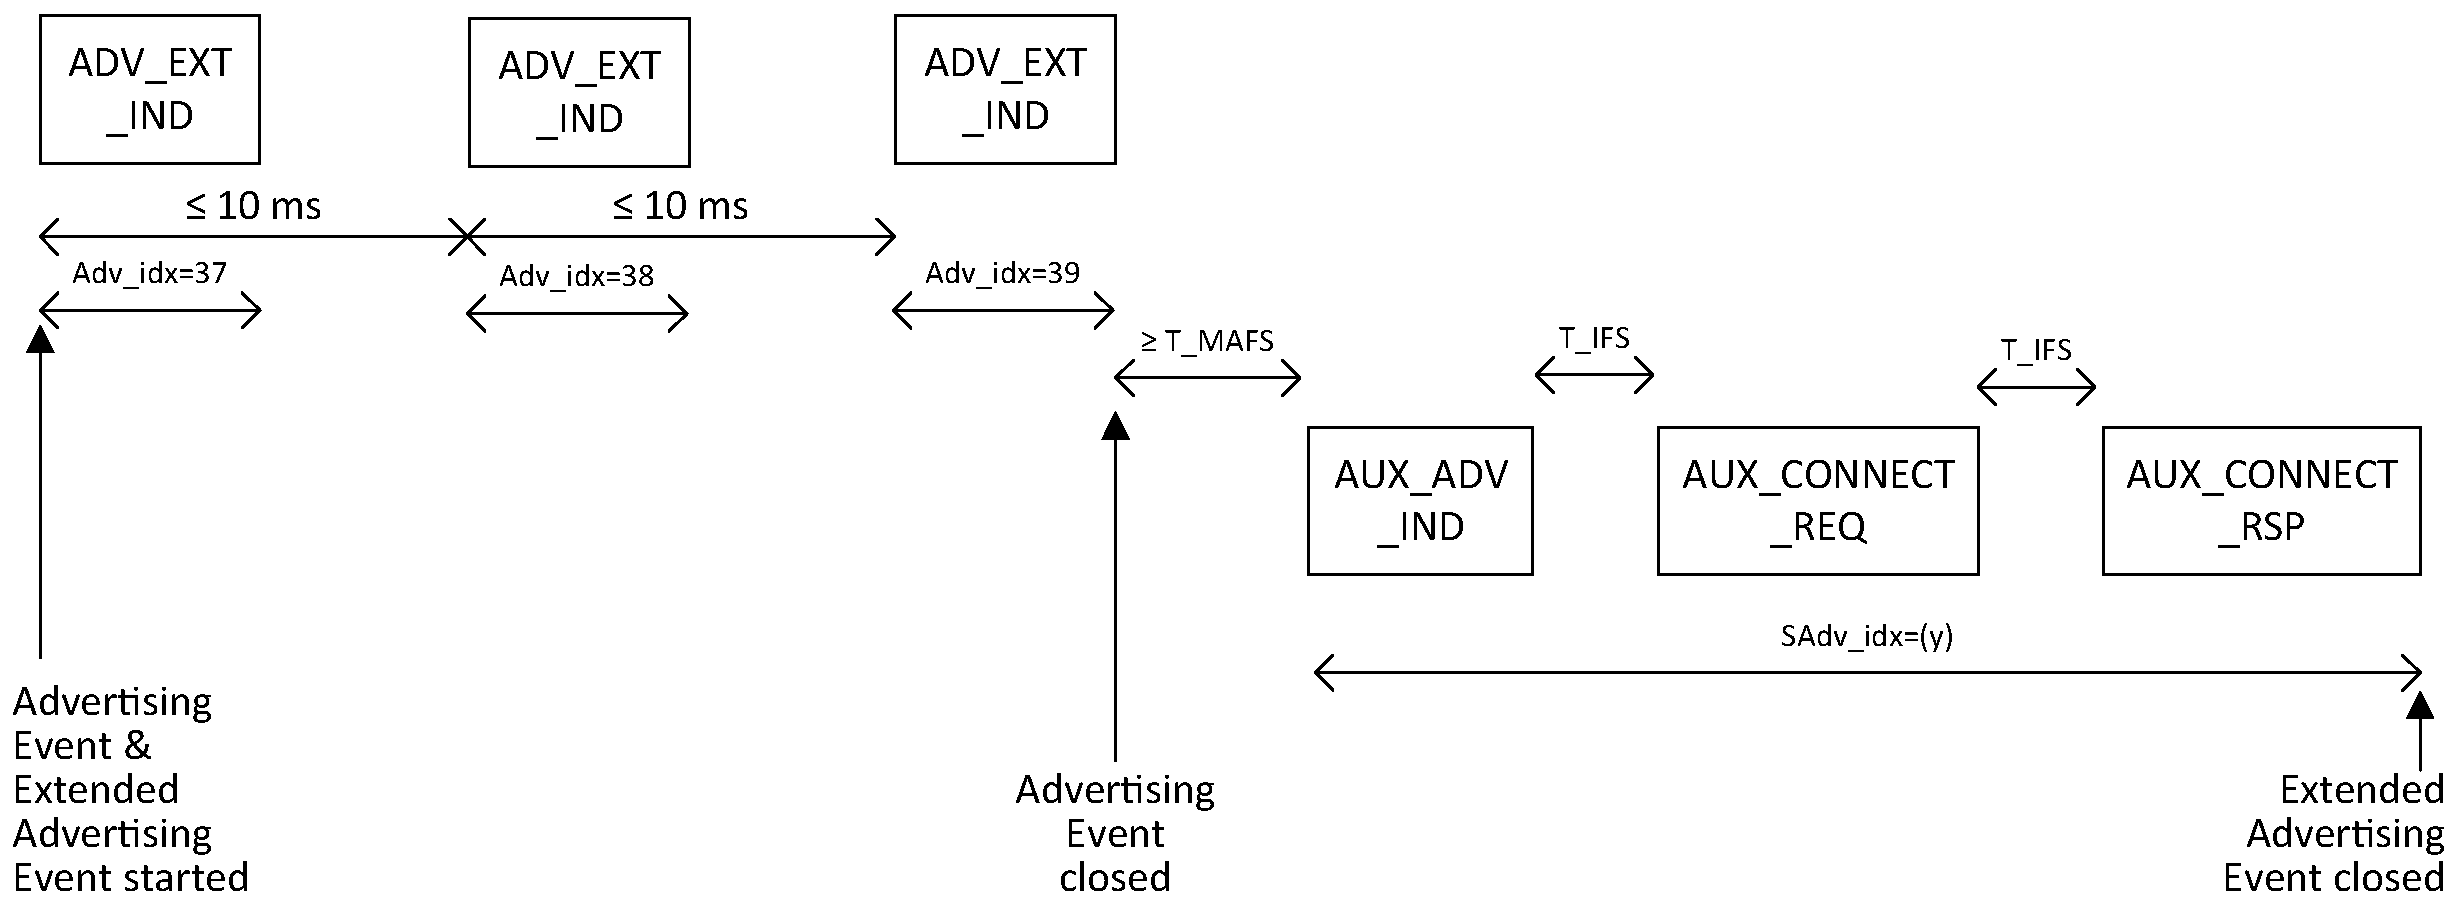 Connectable undirected advertising using ADV_EXT_IND PDUs when an AUX_CONNECT_REQ PDU is received